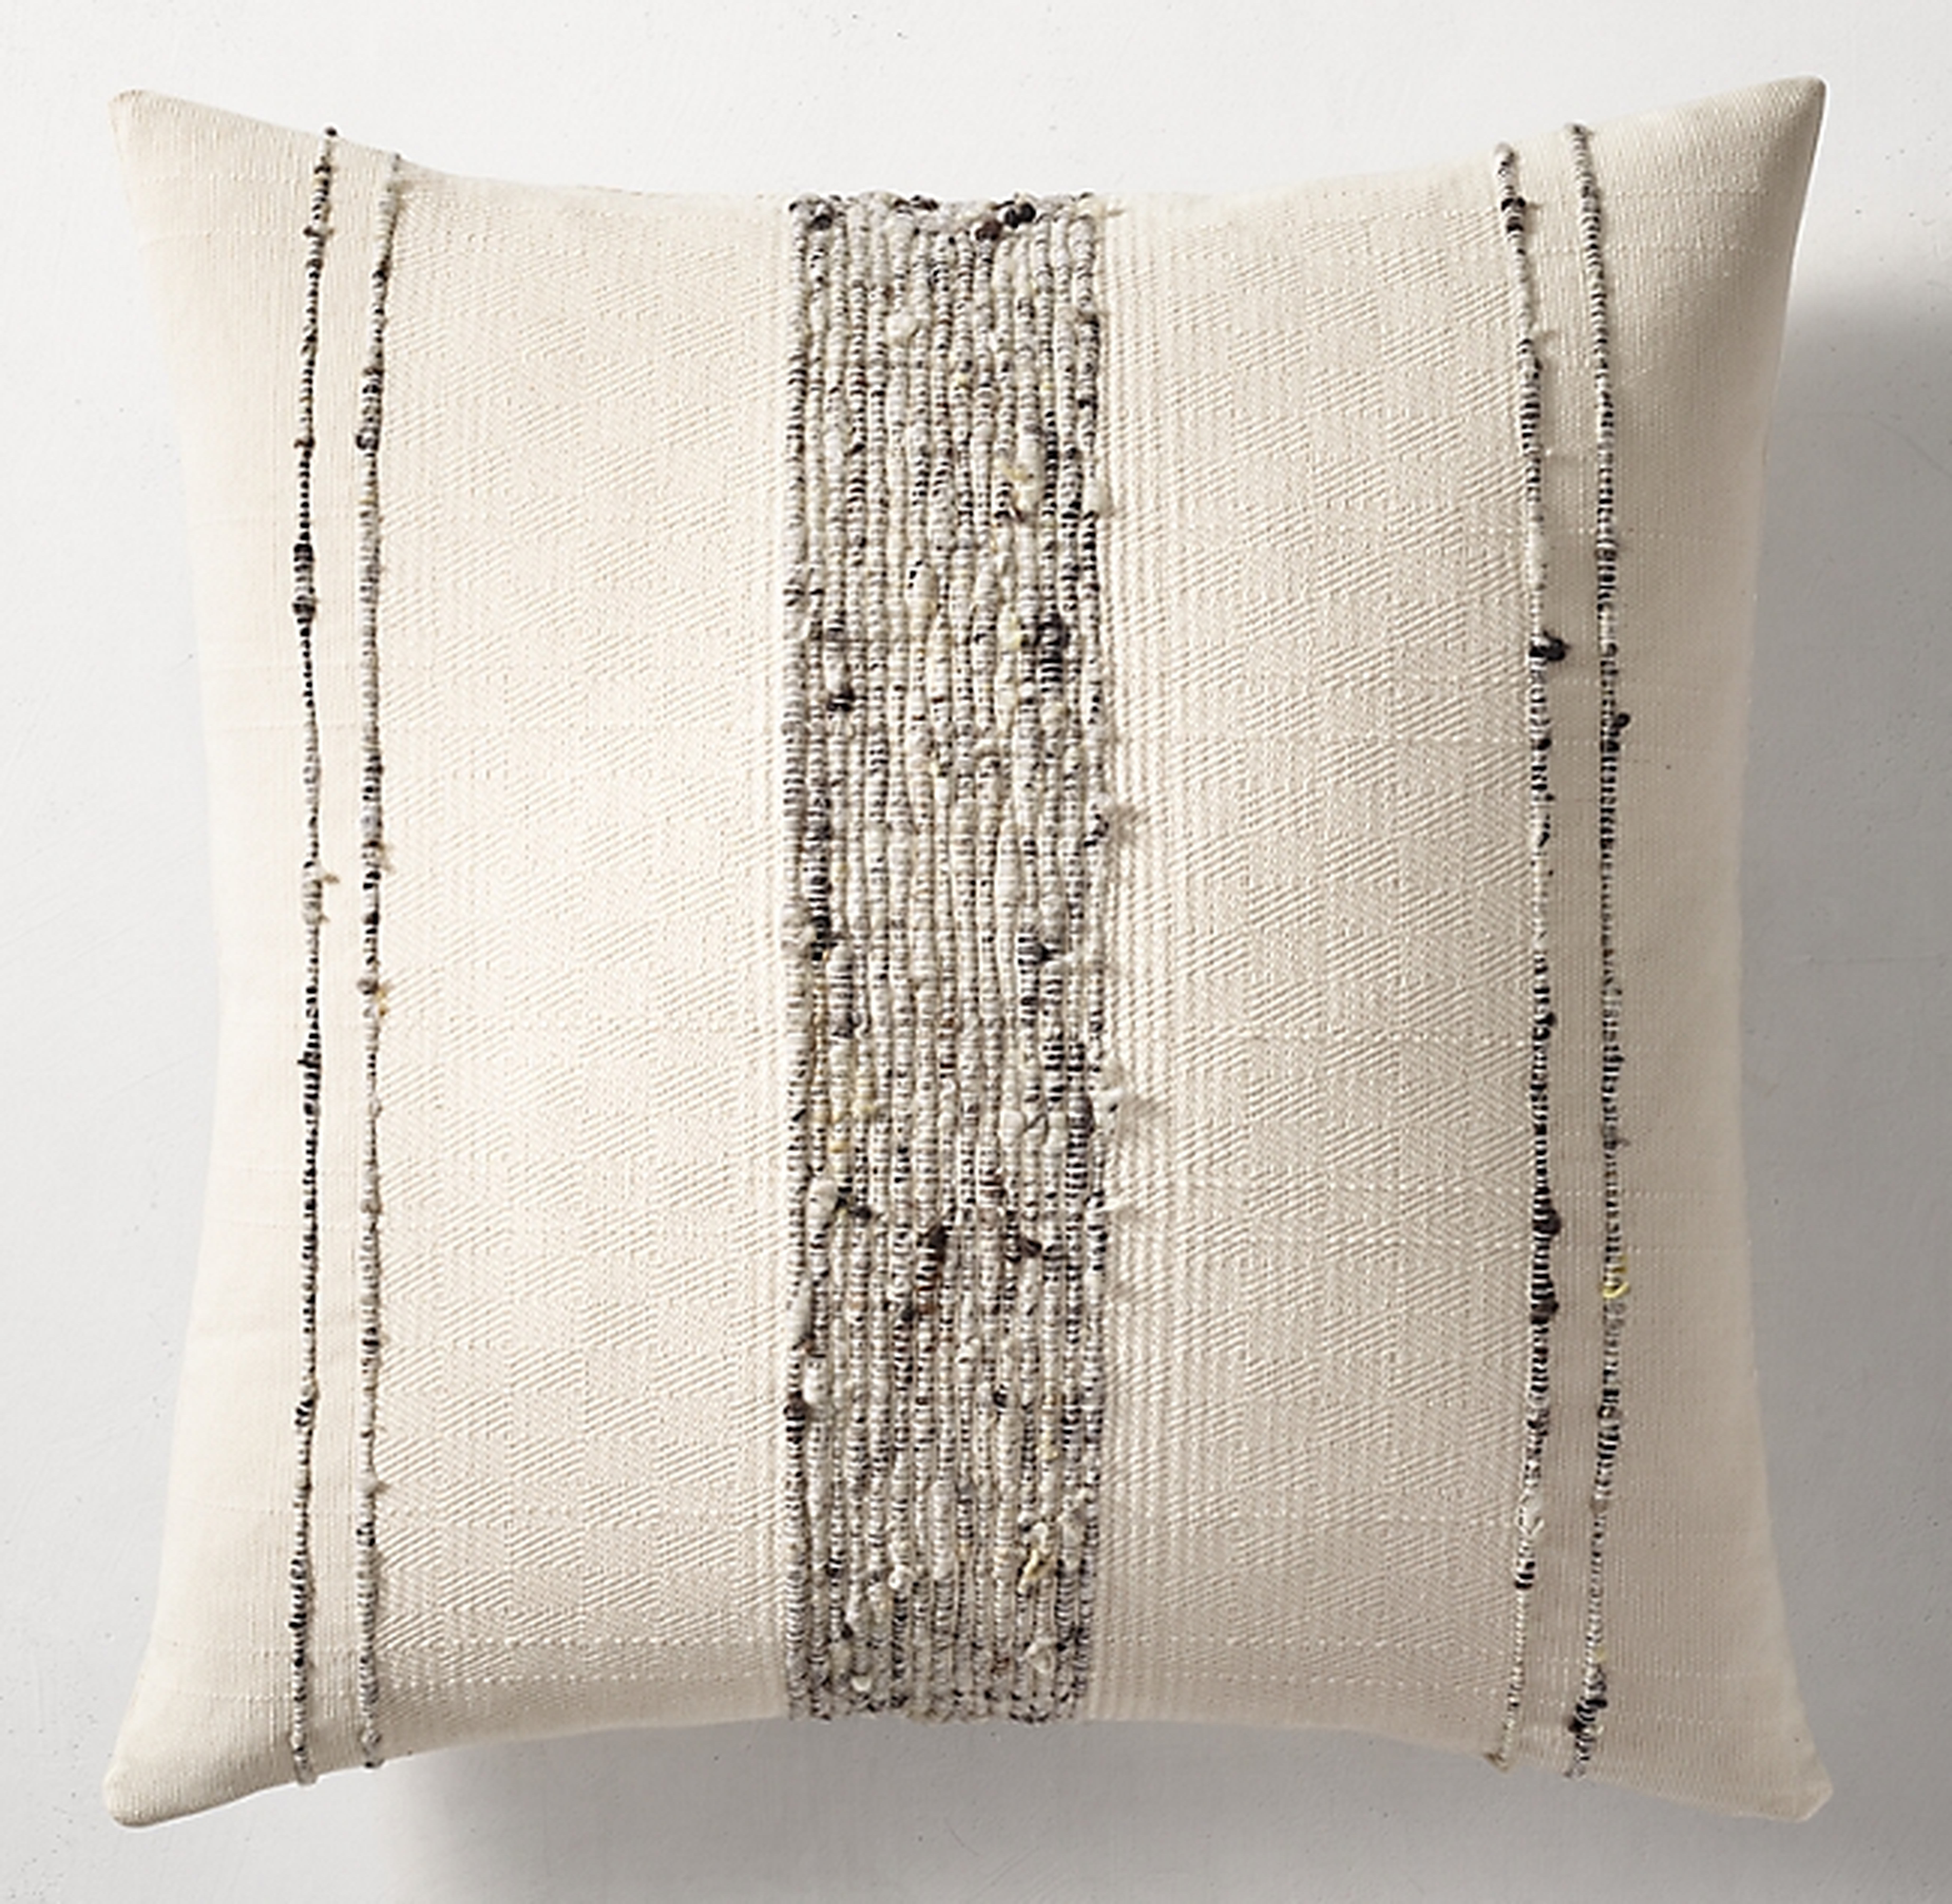 Handwoven Marled Bold Center Stripe Pillow Cover By Azulina Home, White & Gray, 24" x 24" - RH